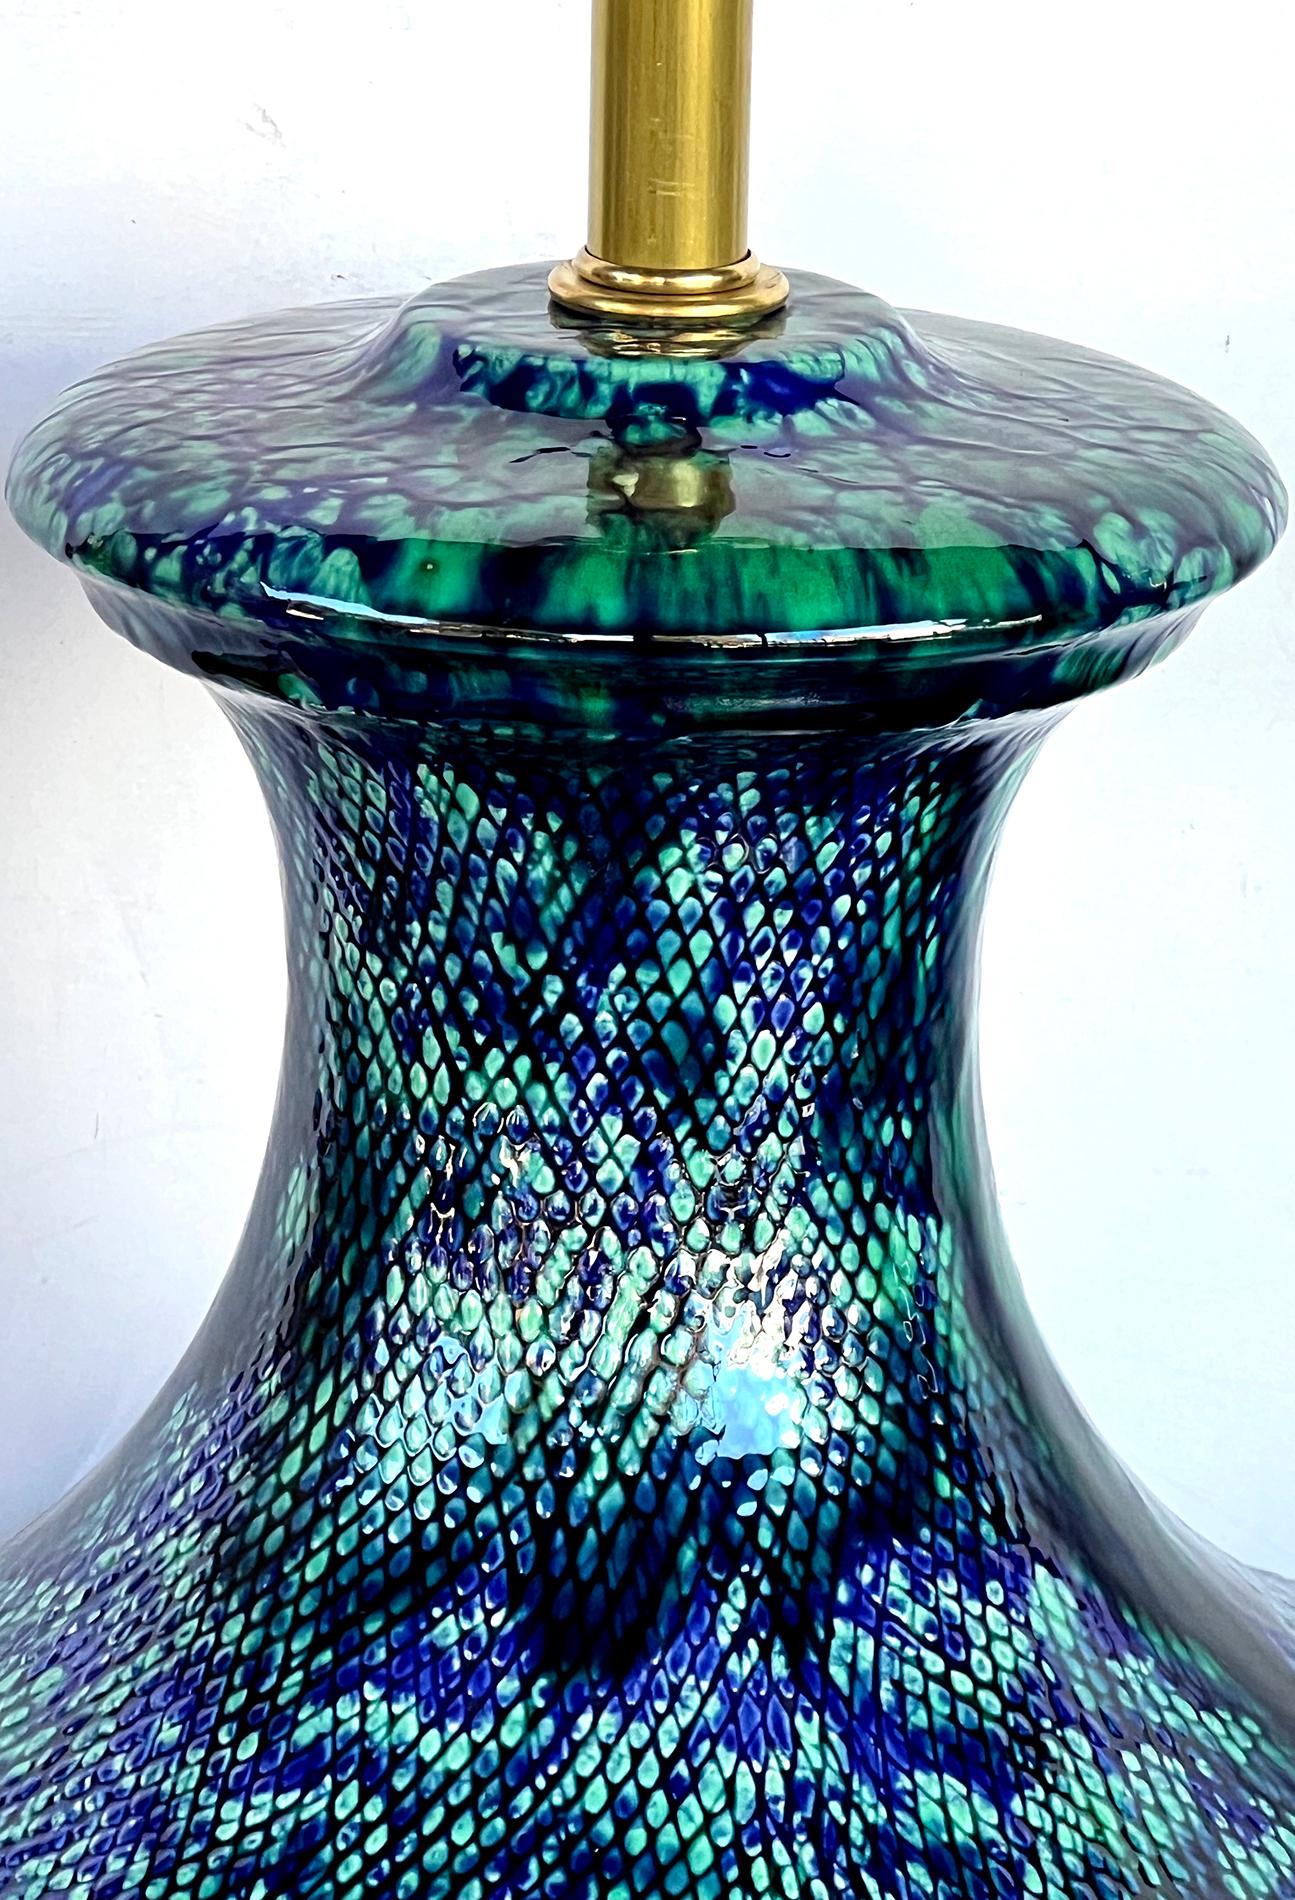 each with flaring neck above a bulbous body; the textured surface covered in a deeply colored blue and teal drip glaze